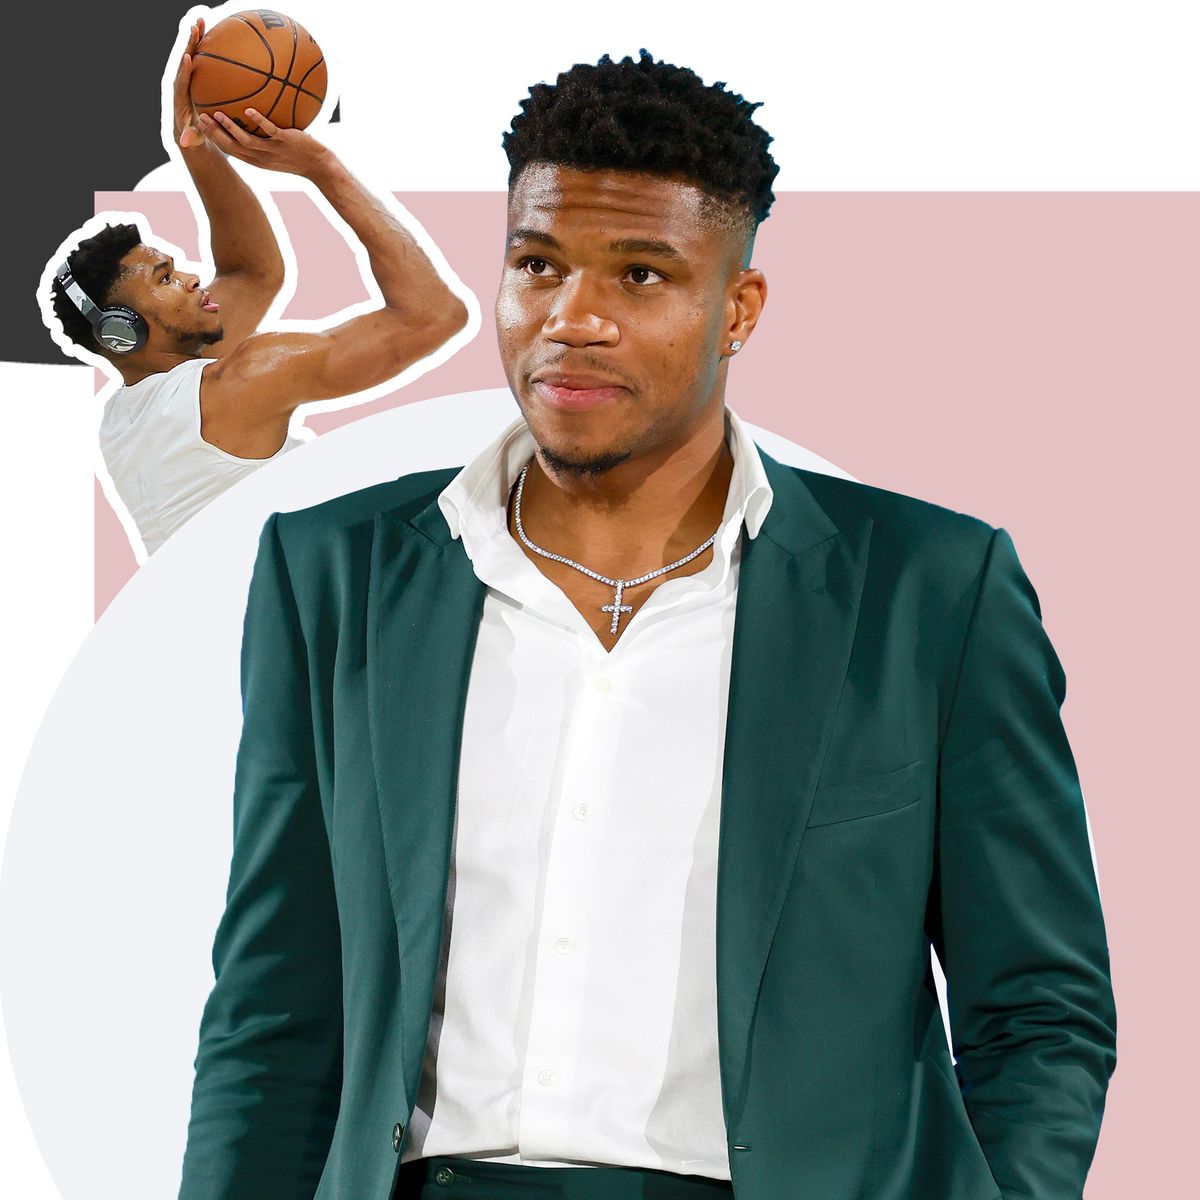 Giannis Antetokounmpo Has Partnered With Avli Modern Greek in